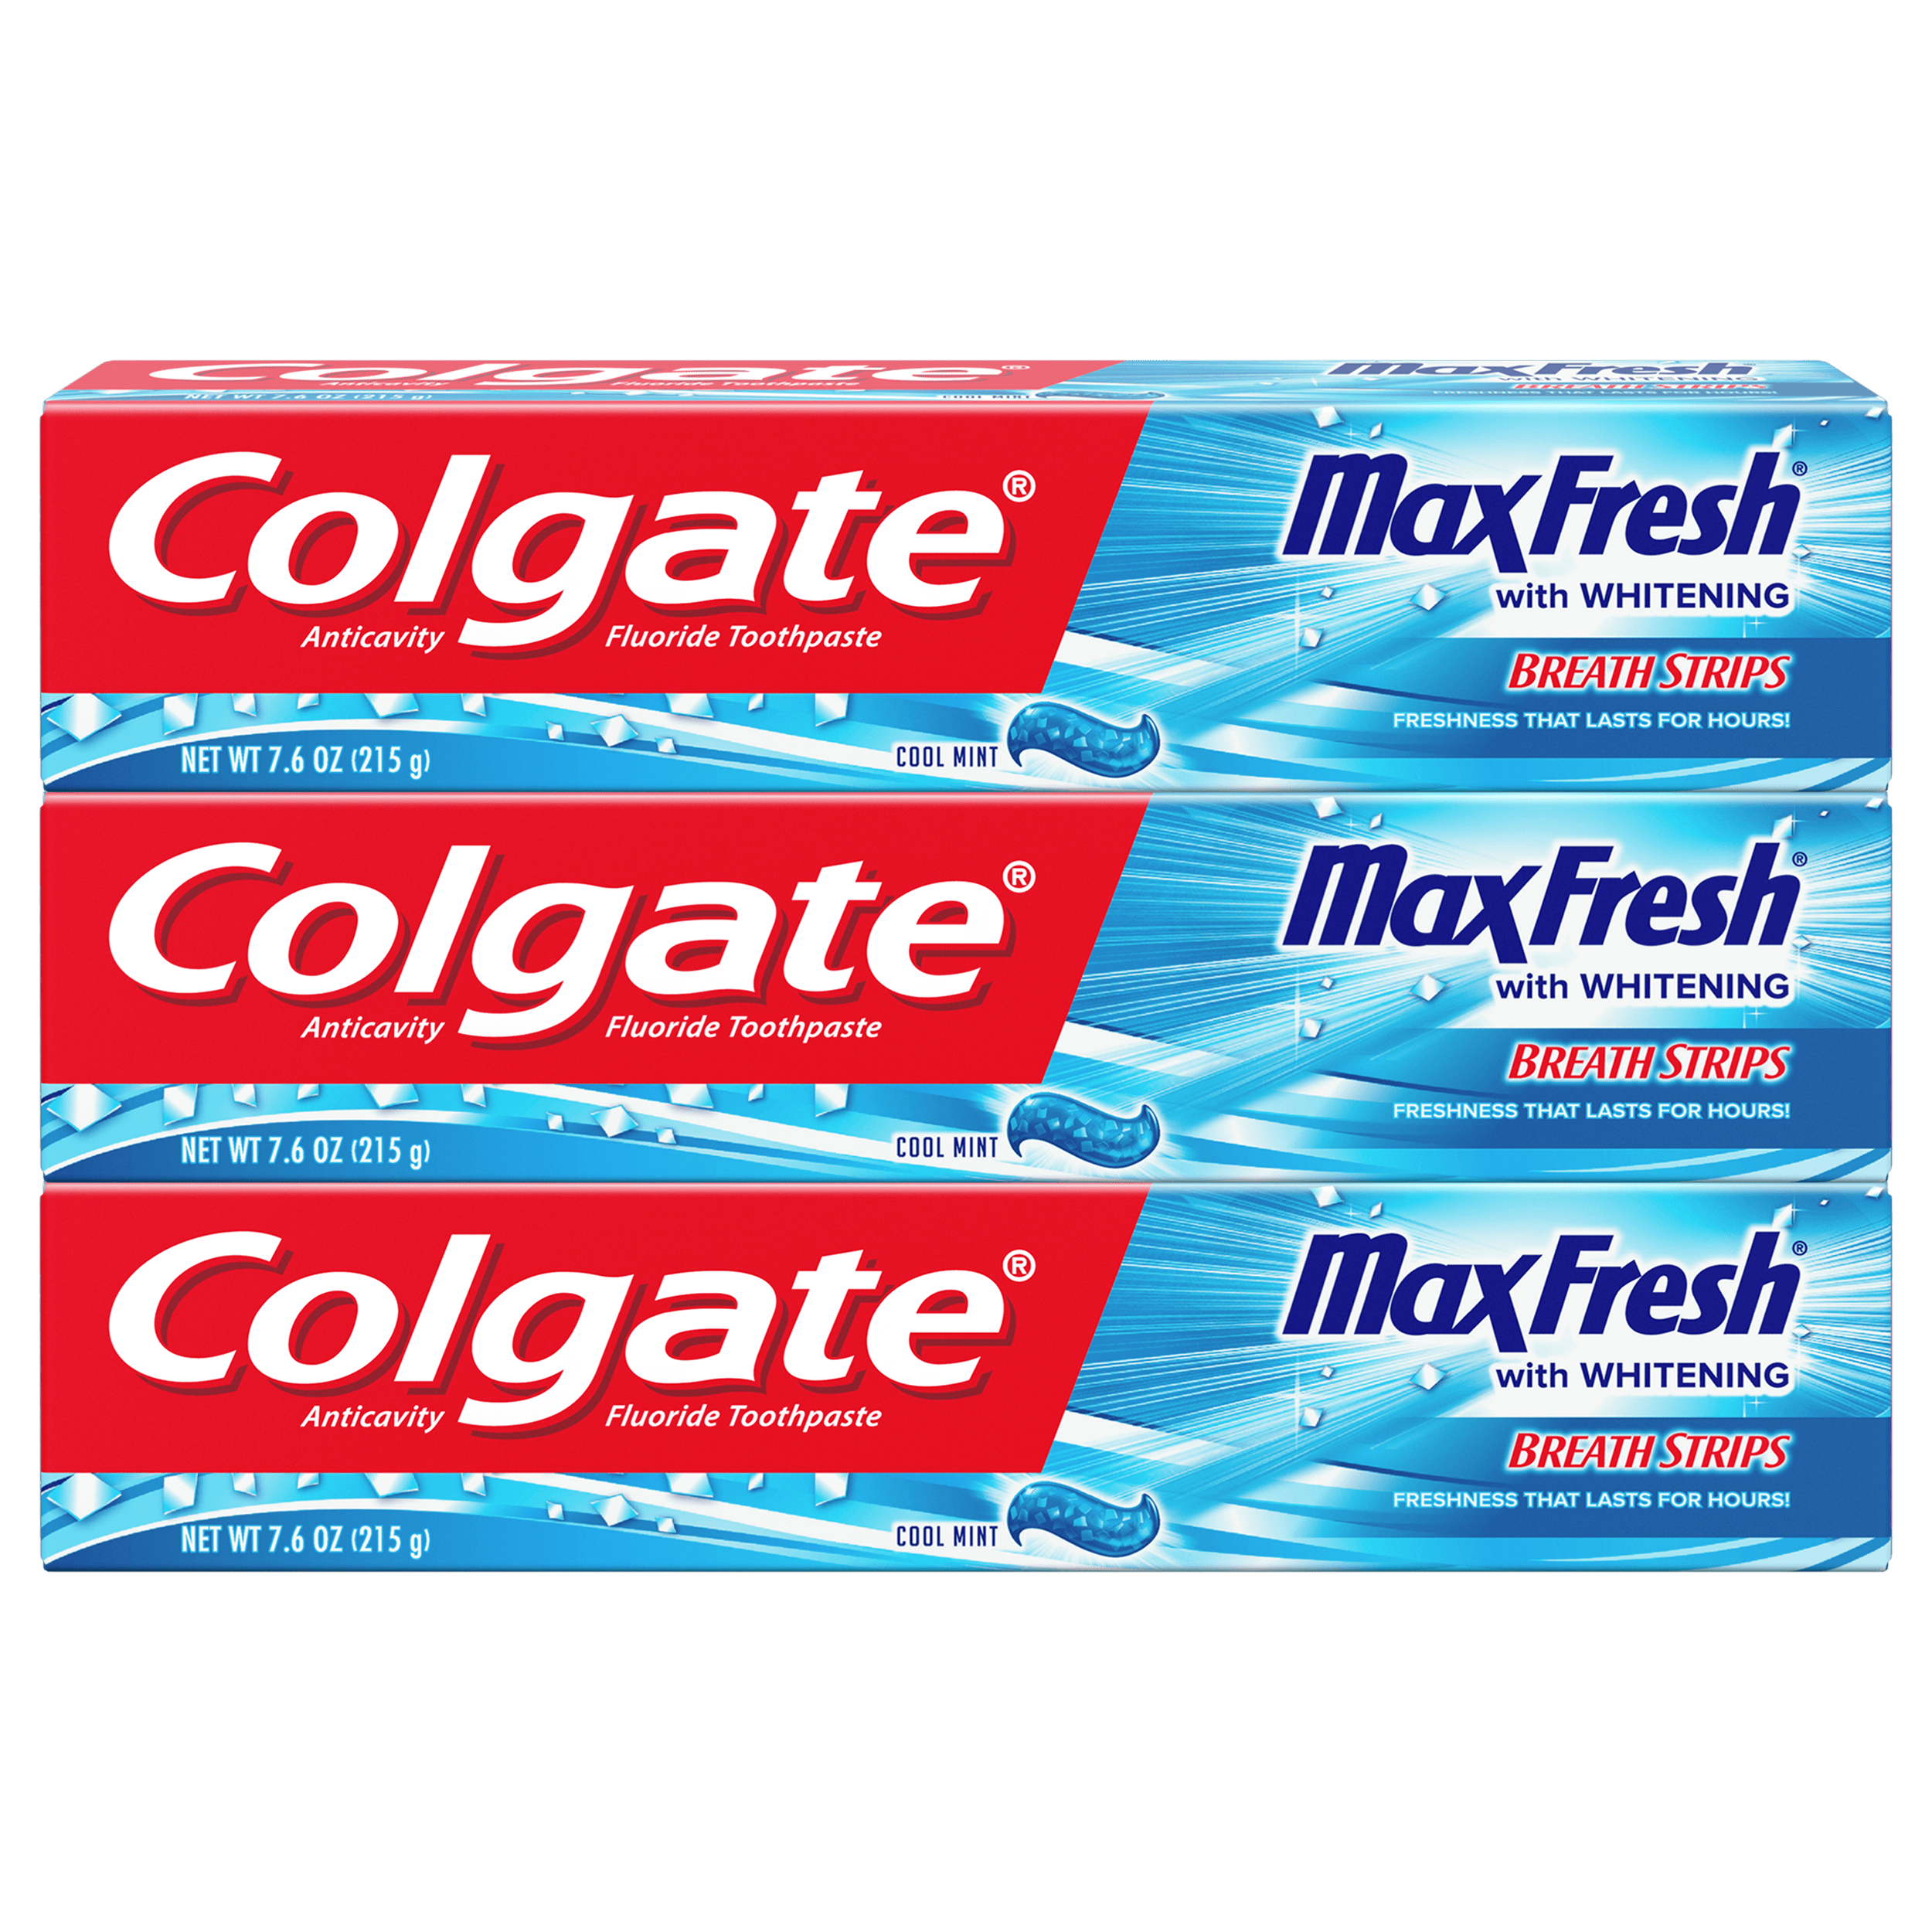 Detail Colgate Toothpaste Images Nomer 32